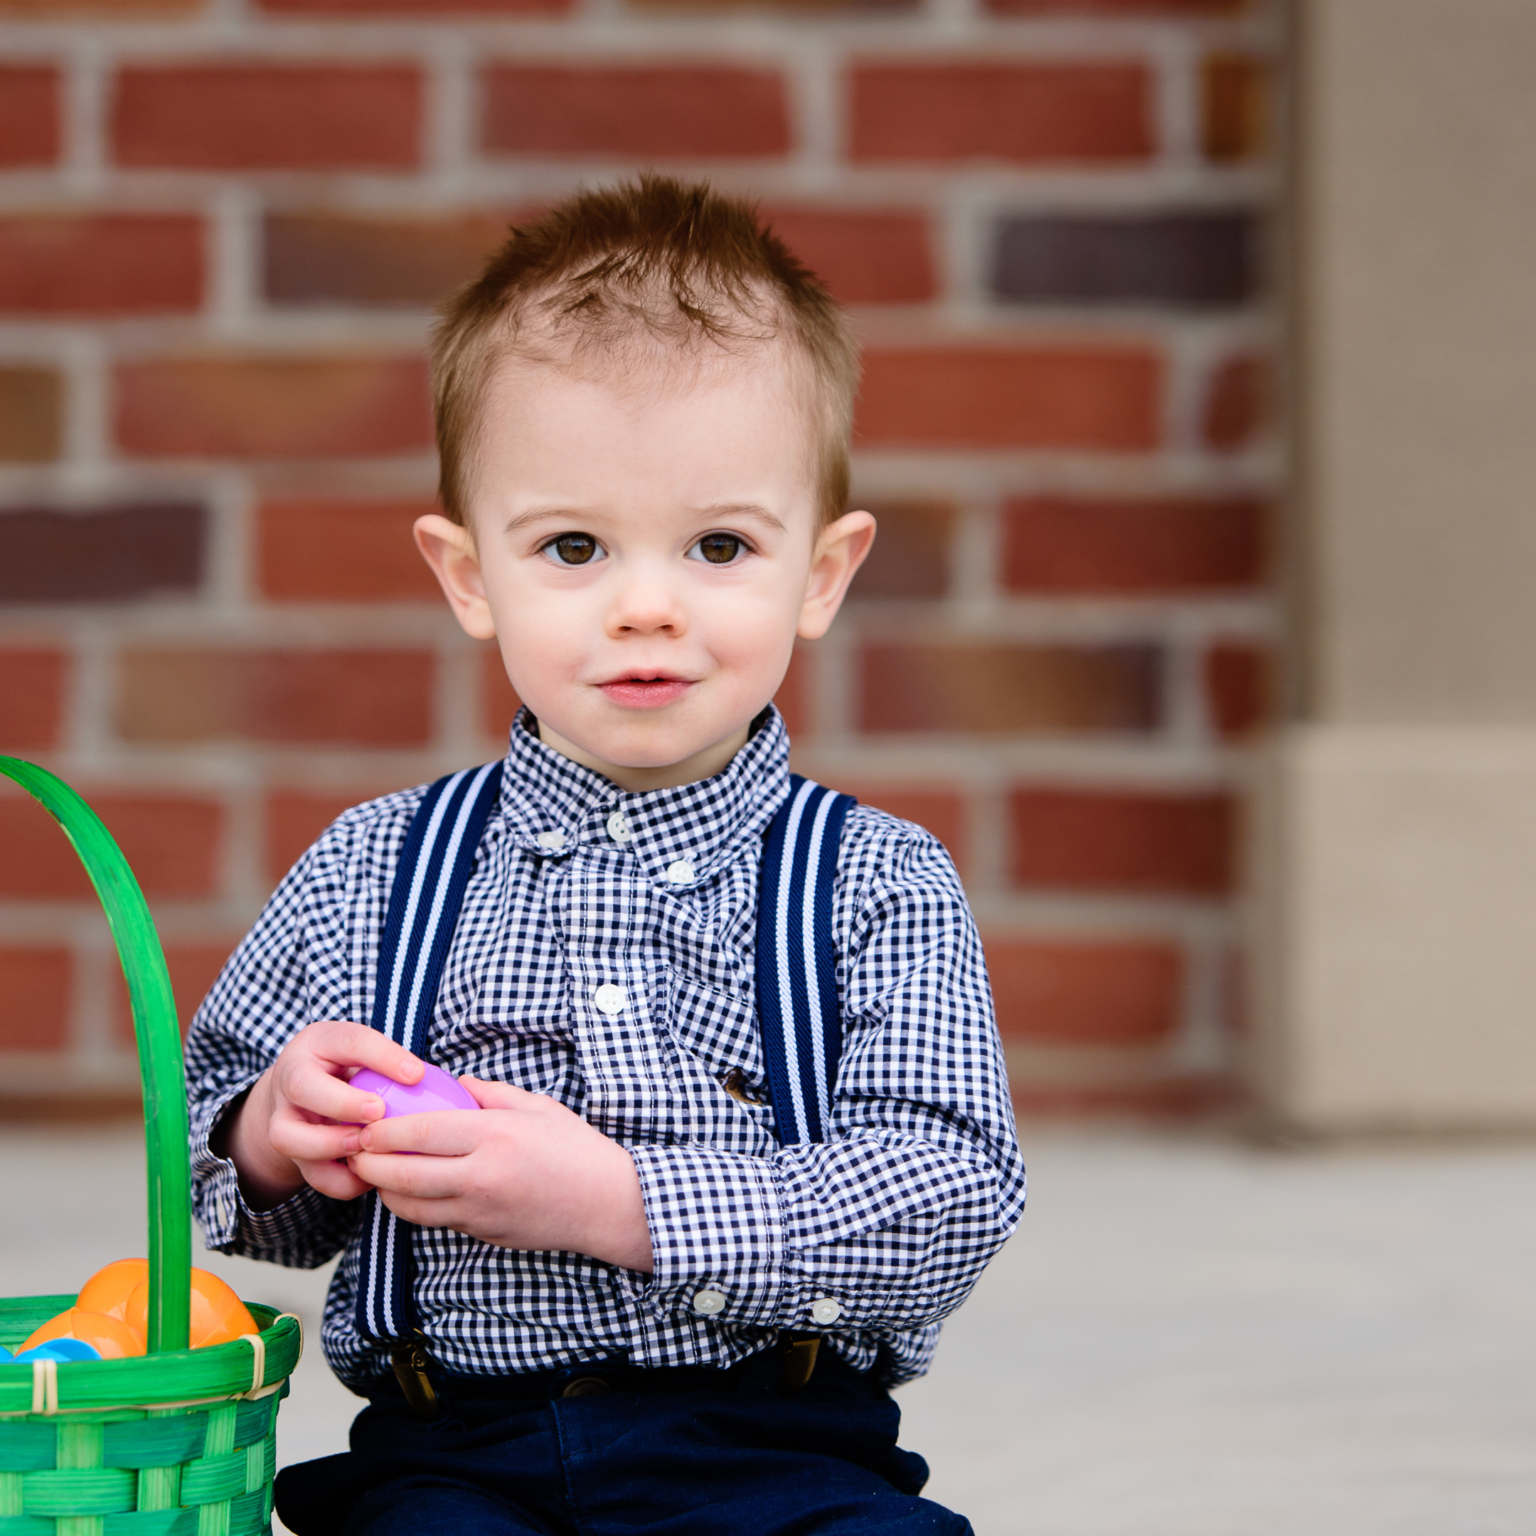 Top 10 Most Adorable Easter Outfits for Toddlers - Struggle Shuttle